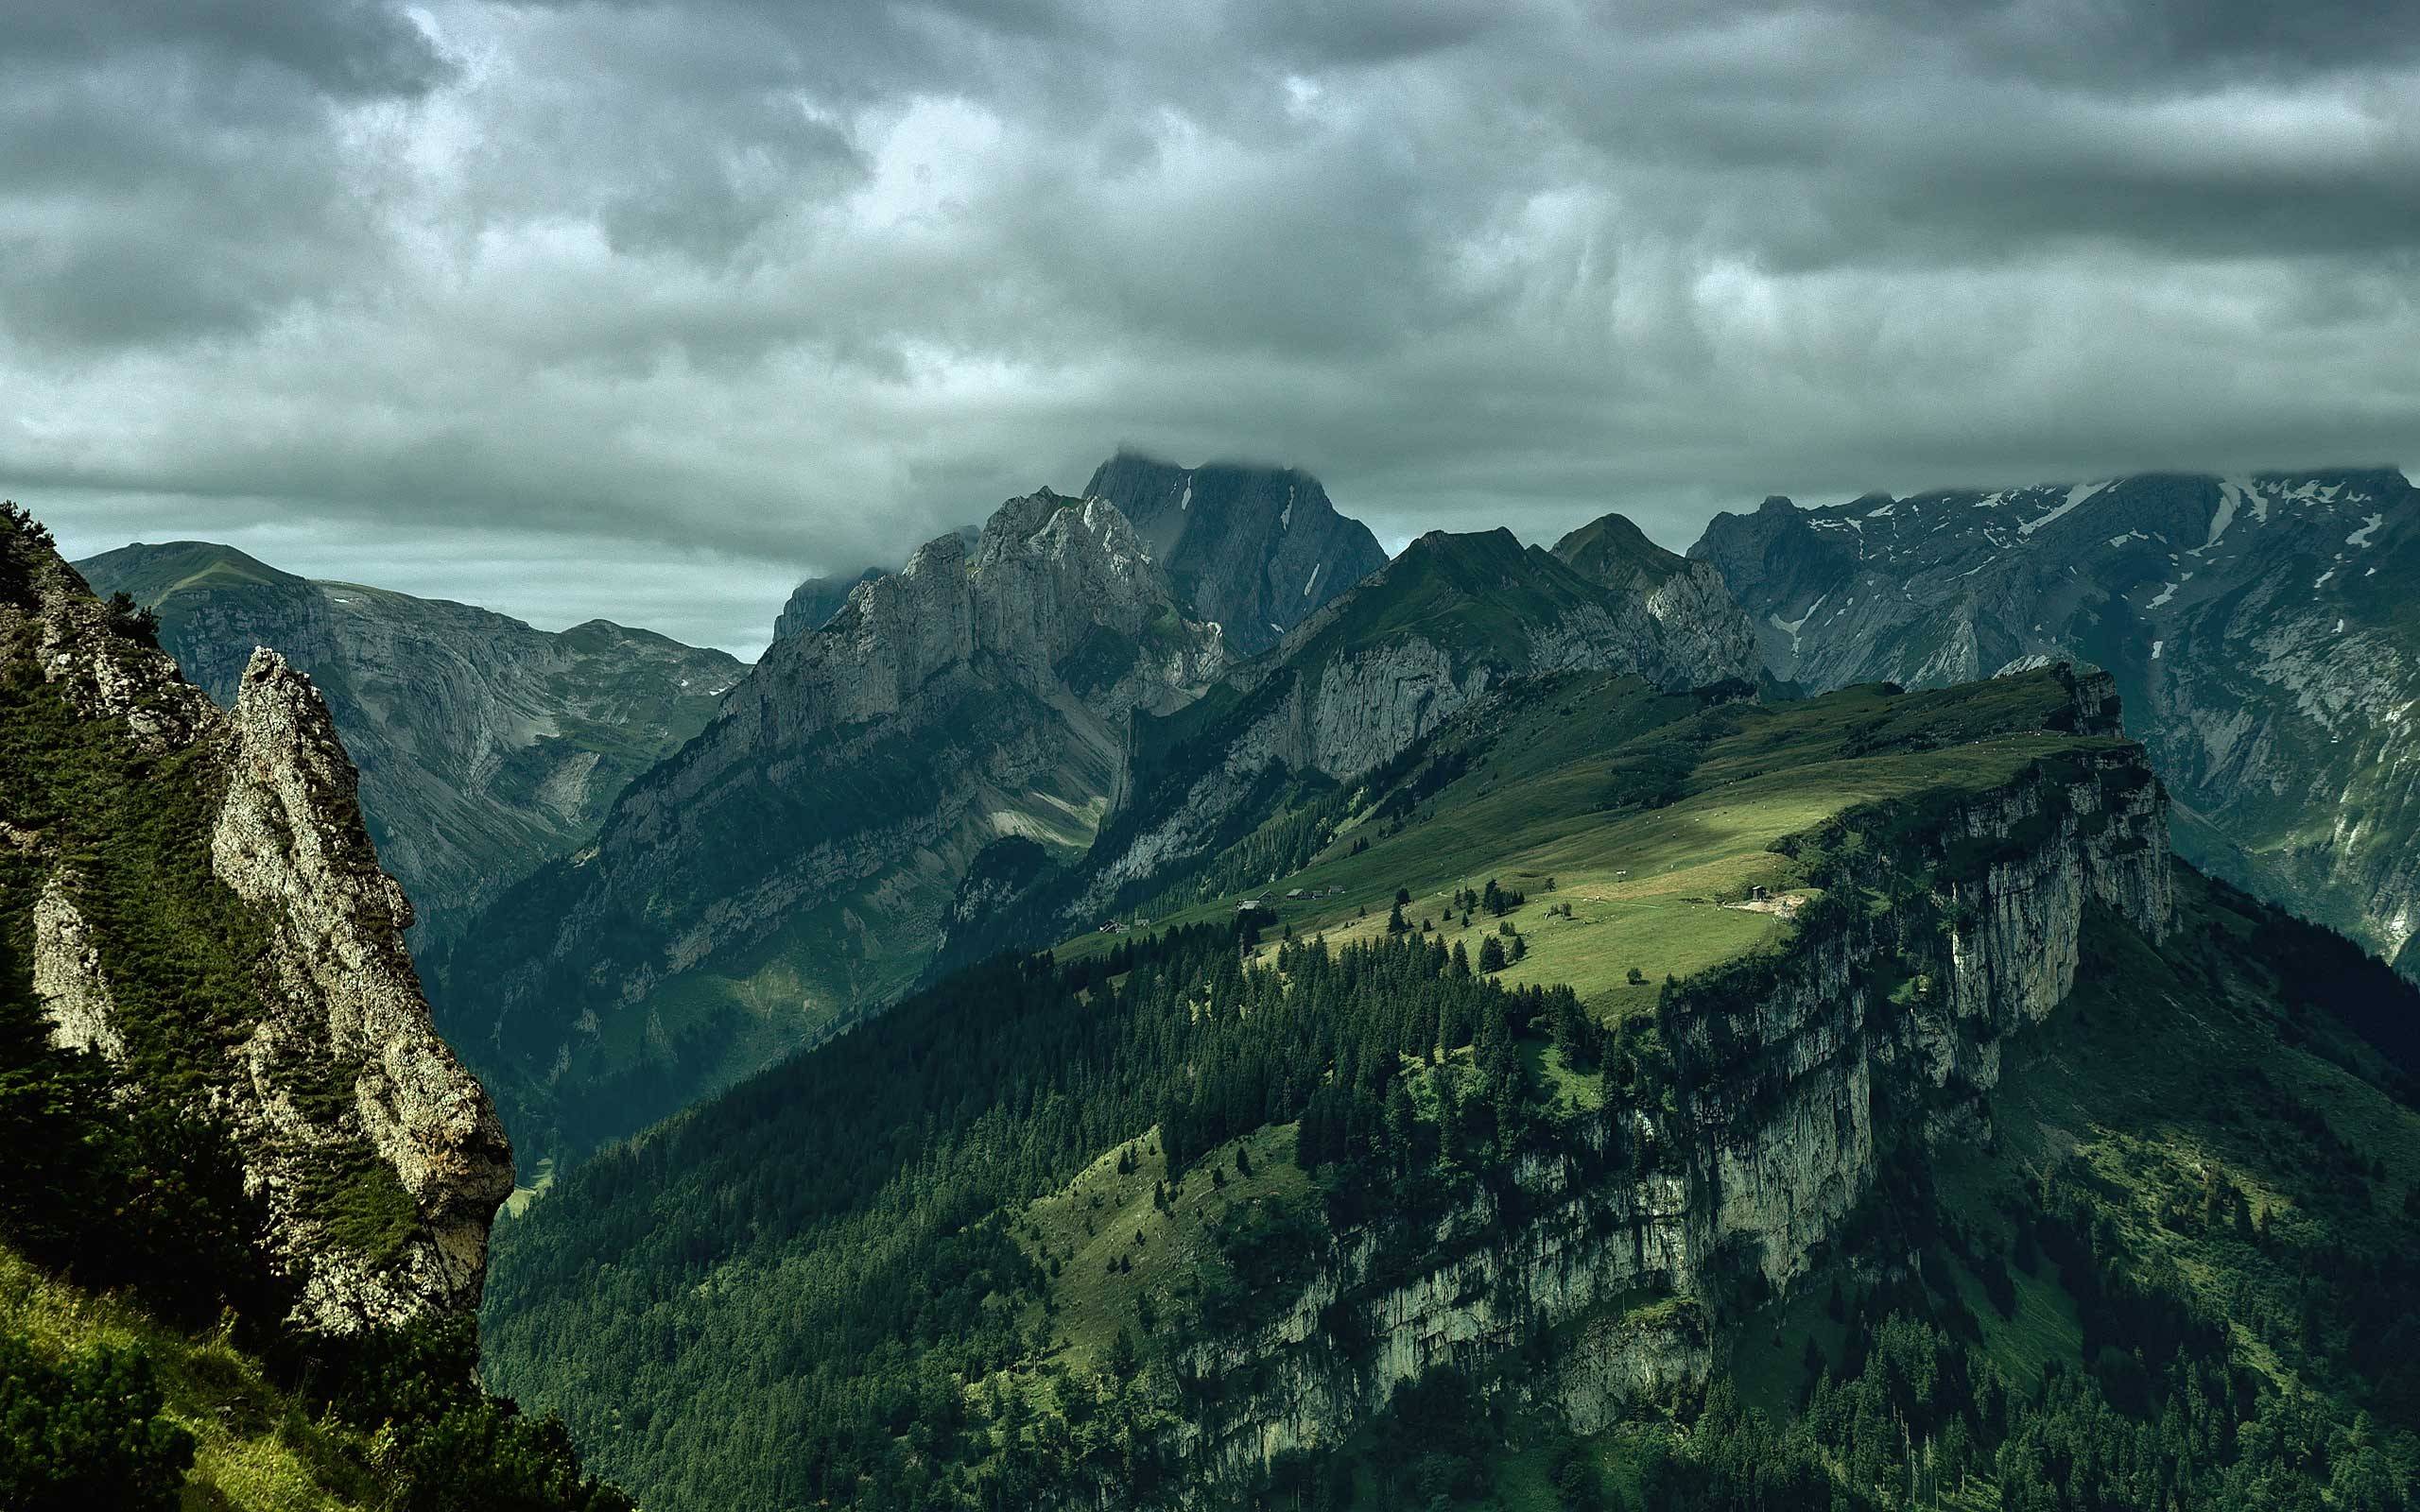 General 2560x1600 mountains nature landscape clouds Switzerland mountain pass sky Europe green Alps